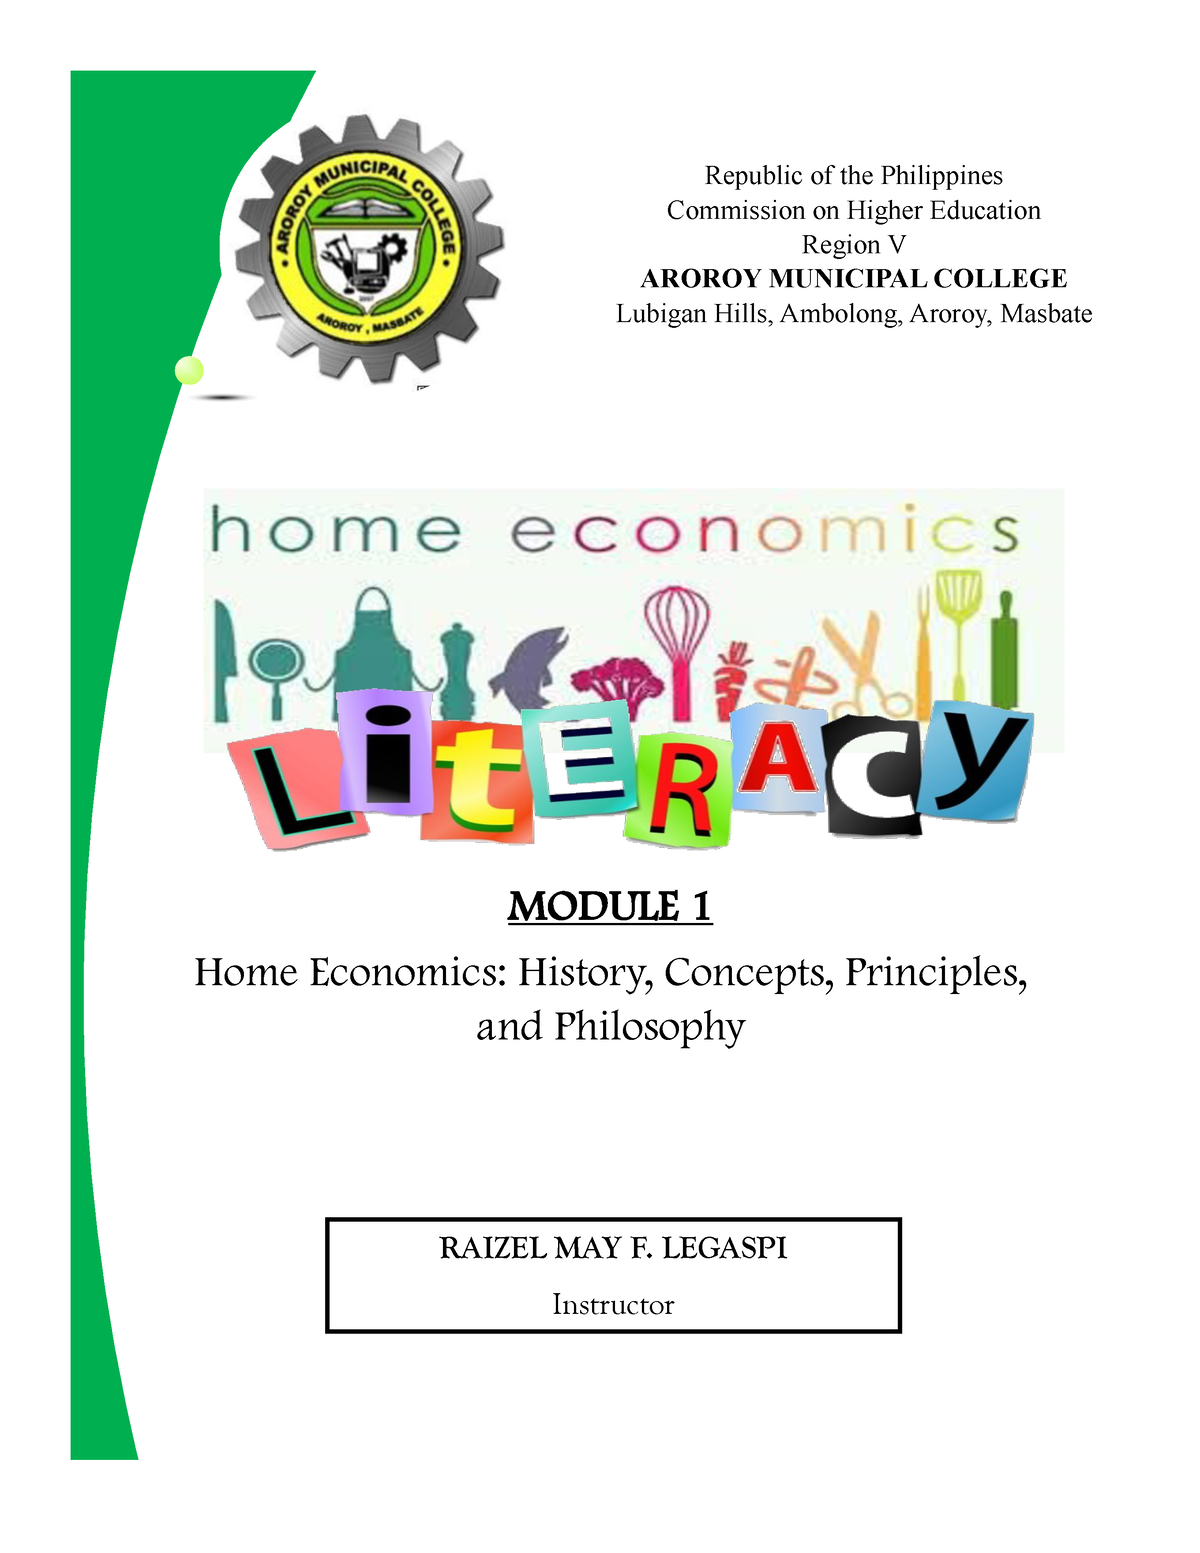 thesis title about home economics in the philippines